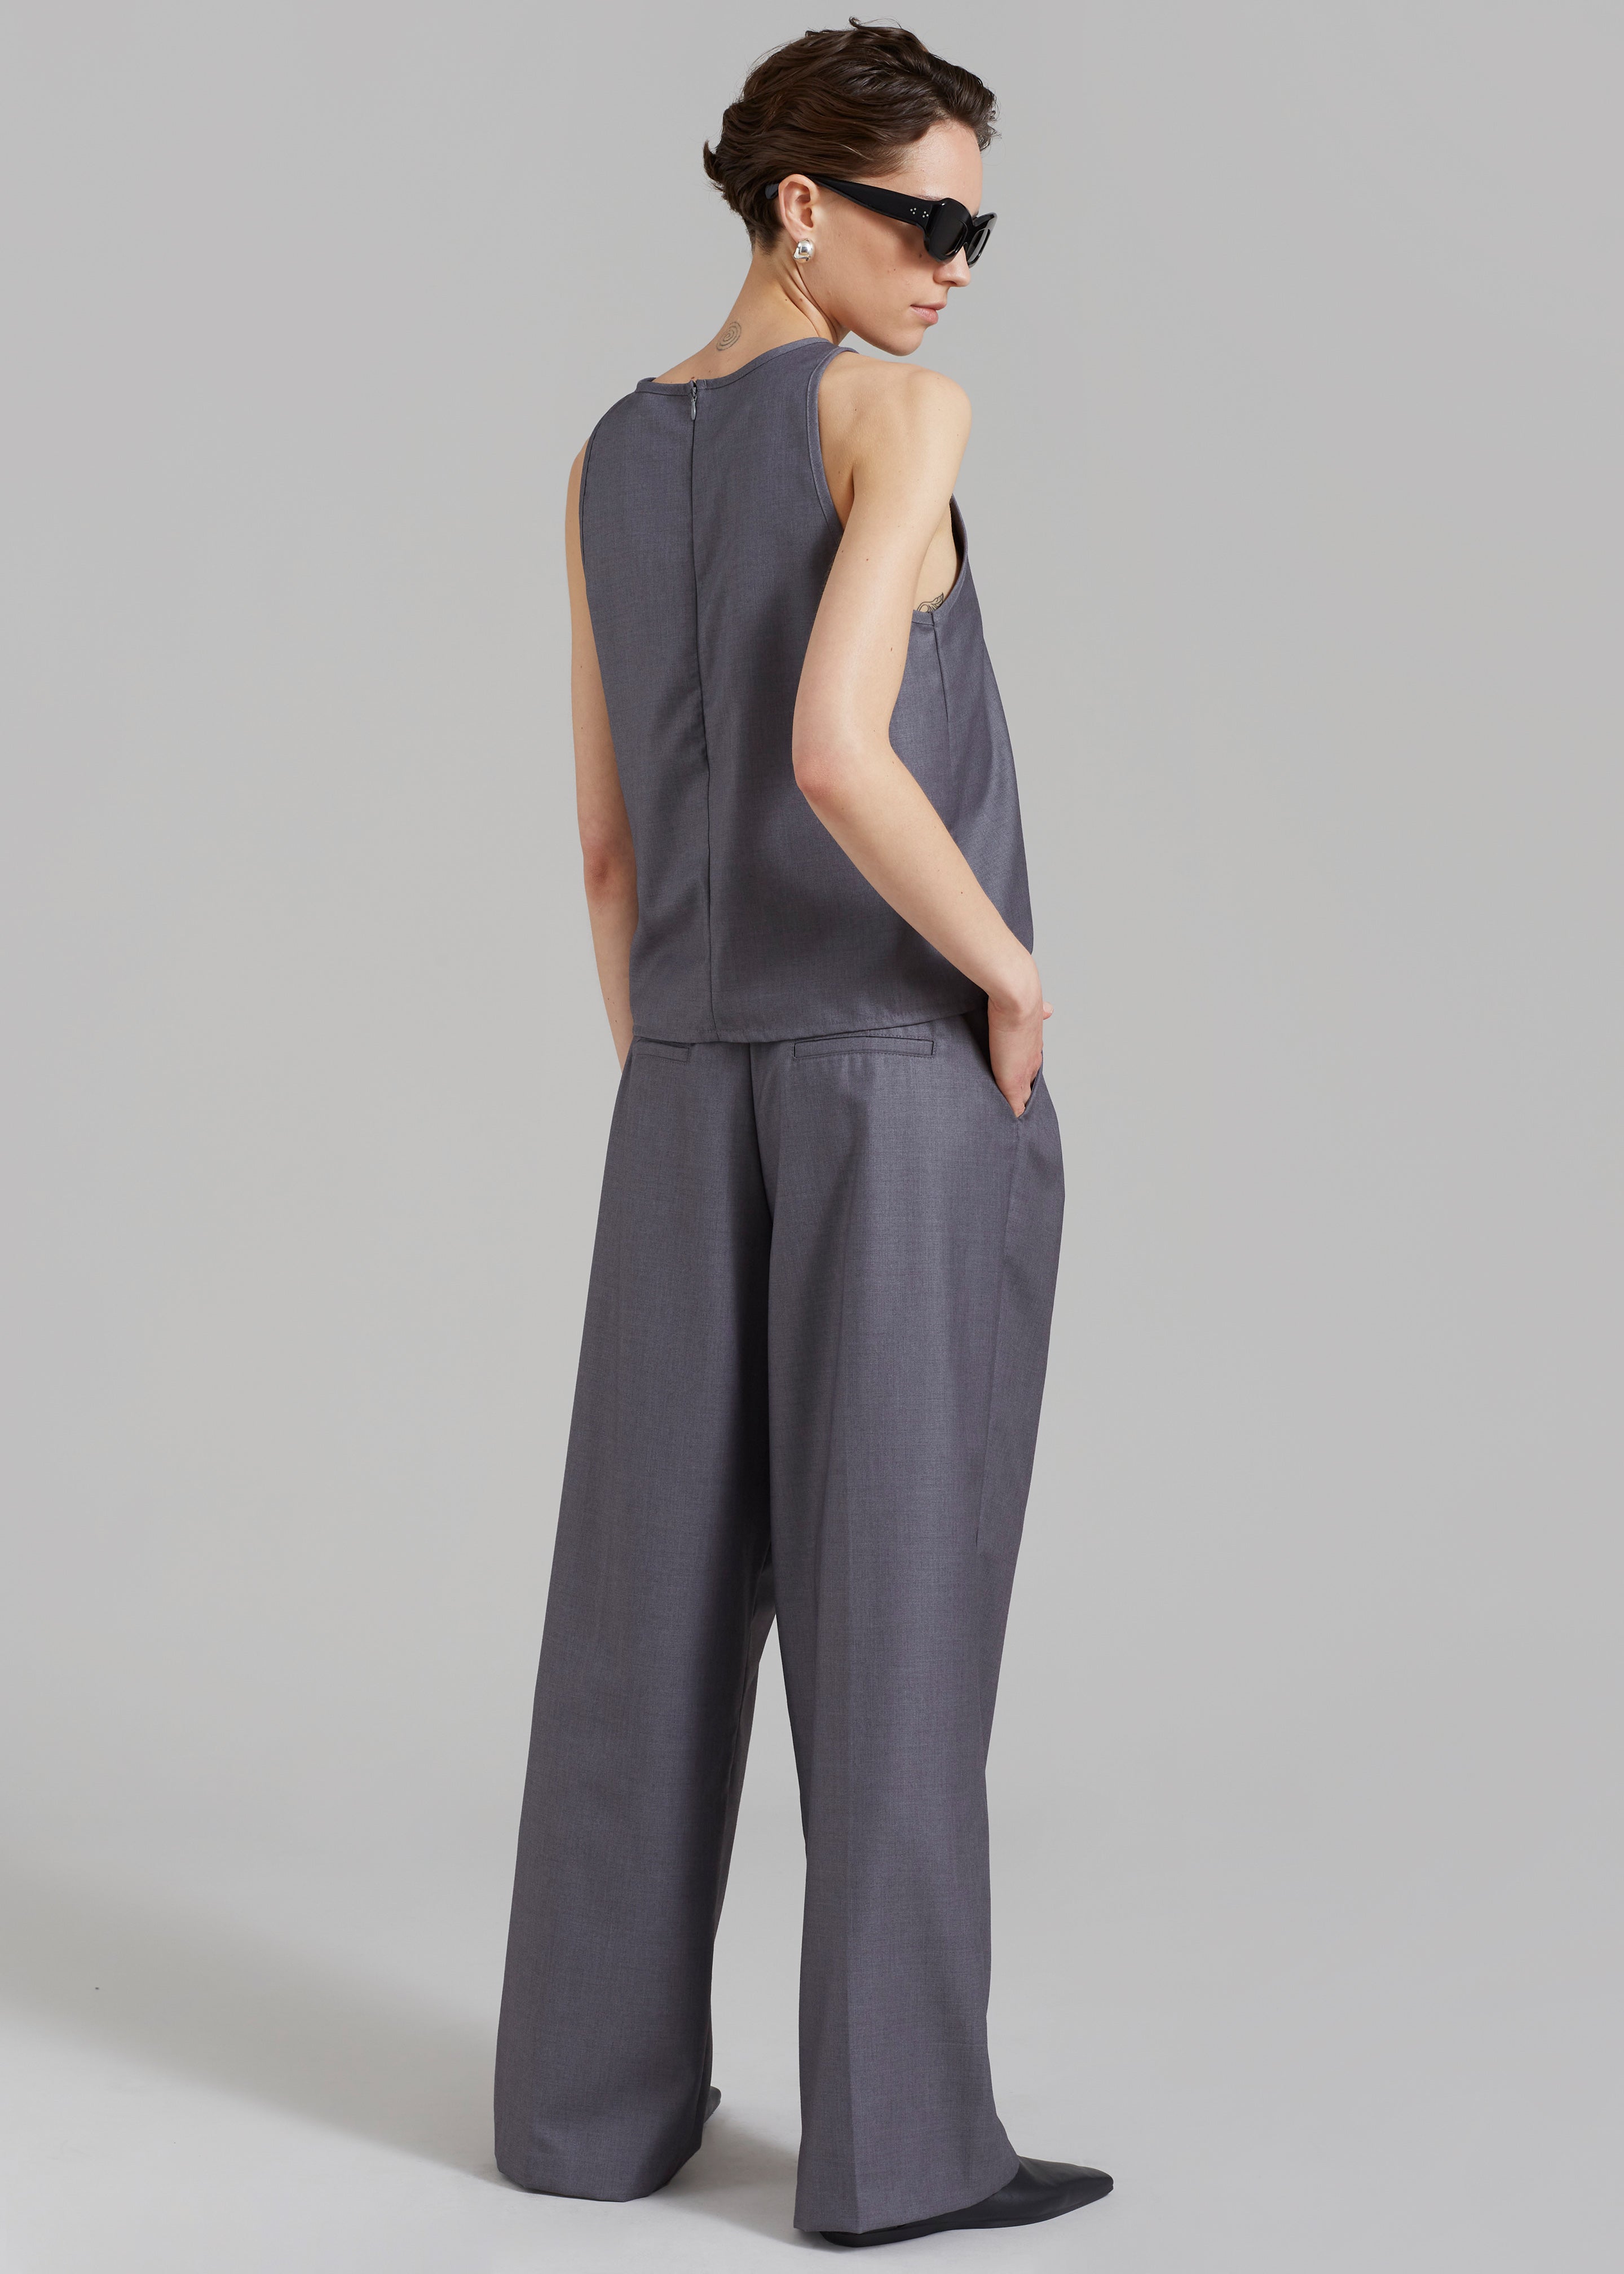 Clay Belted Pants - Grey - 9